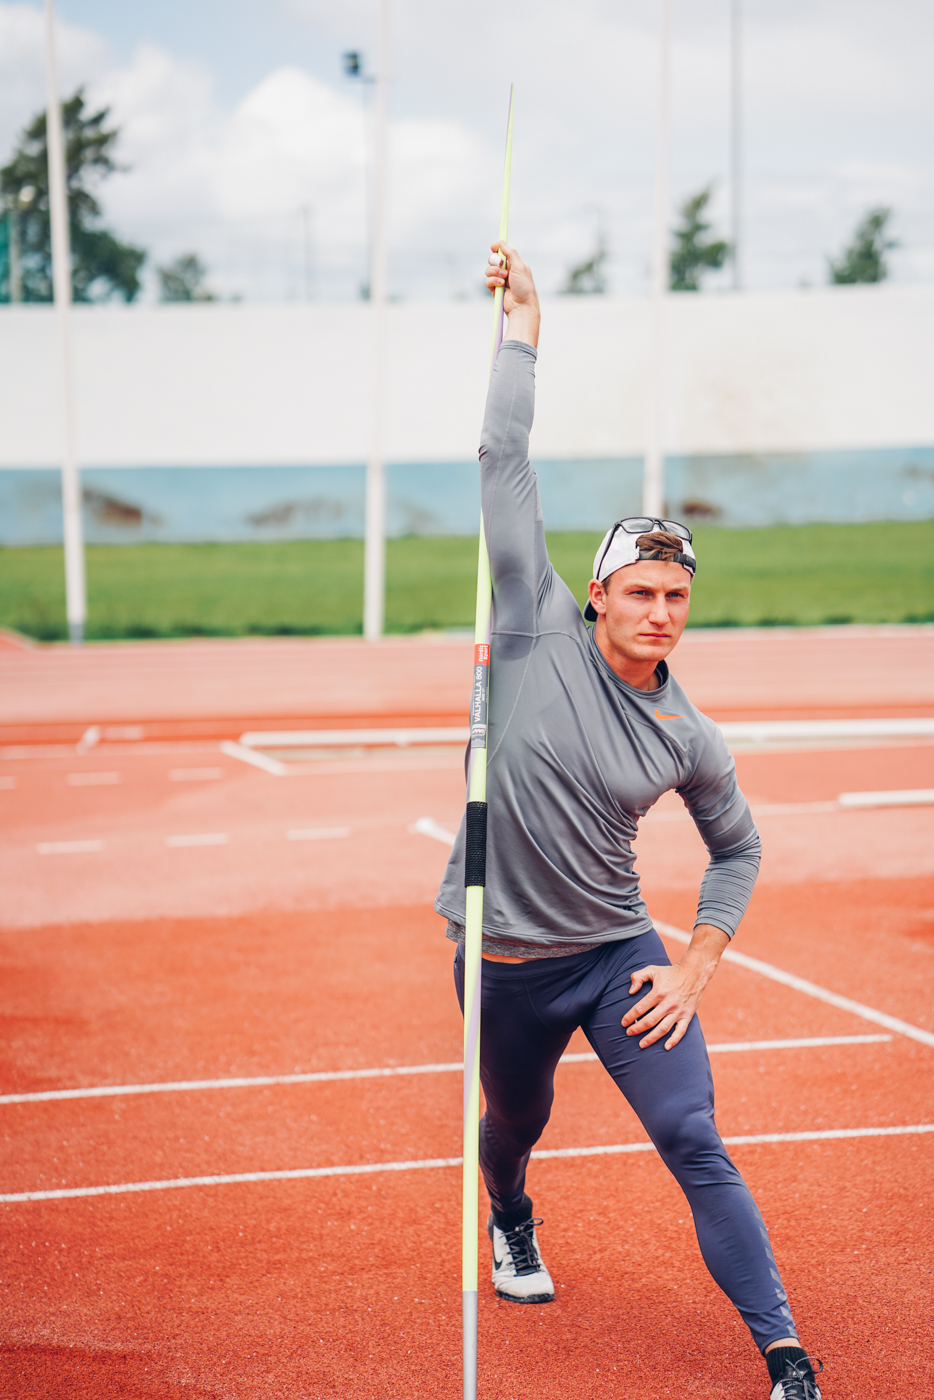 javelin throw pictures